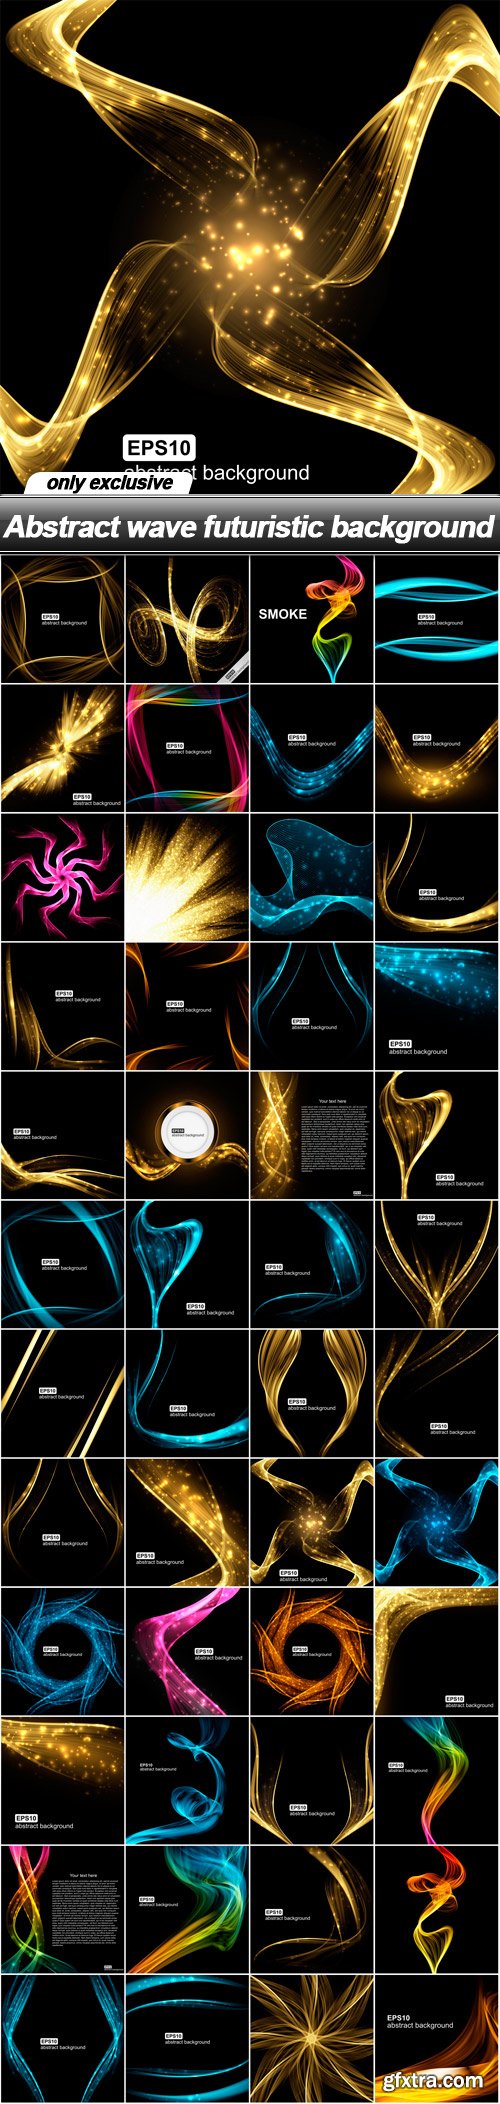 Abstract wave futuristic background - 48 EPS